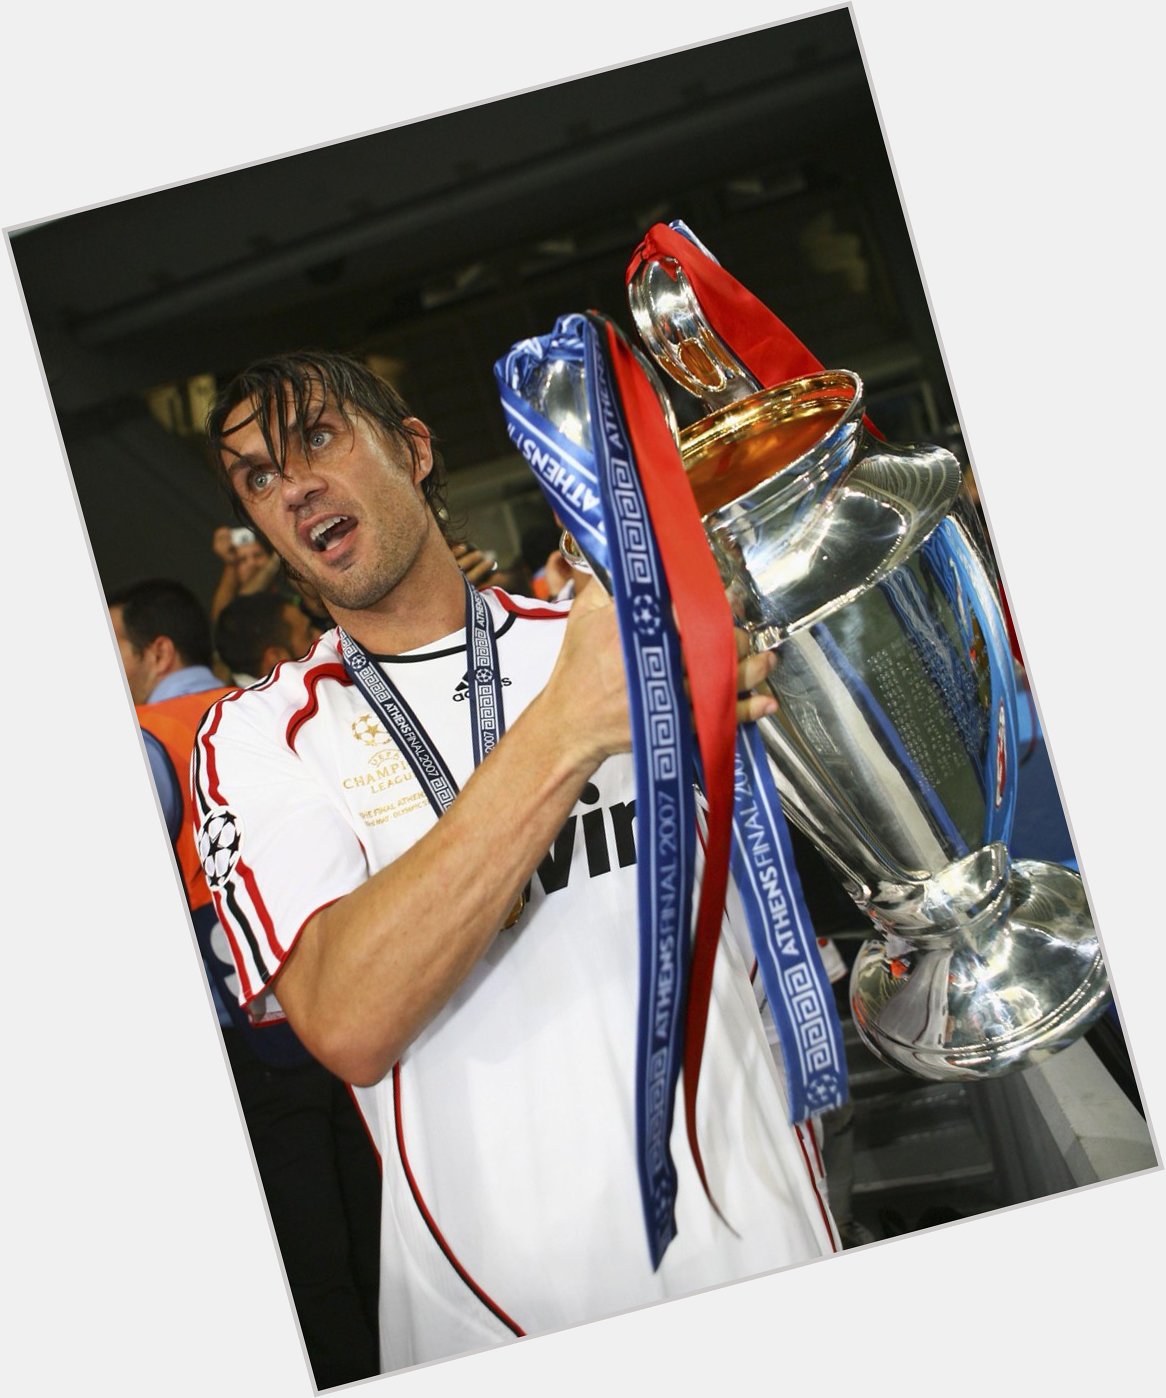 One of the all-time greats was born in 1968. Happy birthday, Paolo Maldini! 